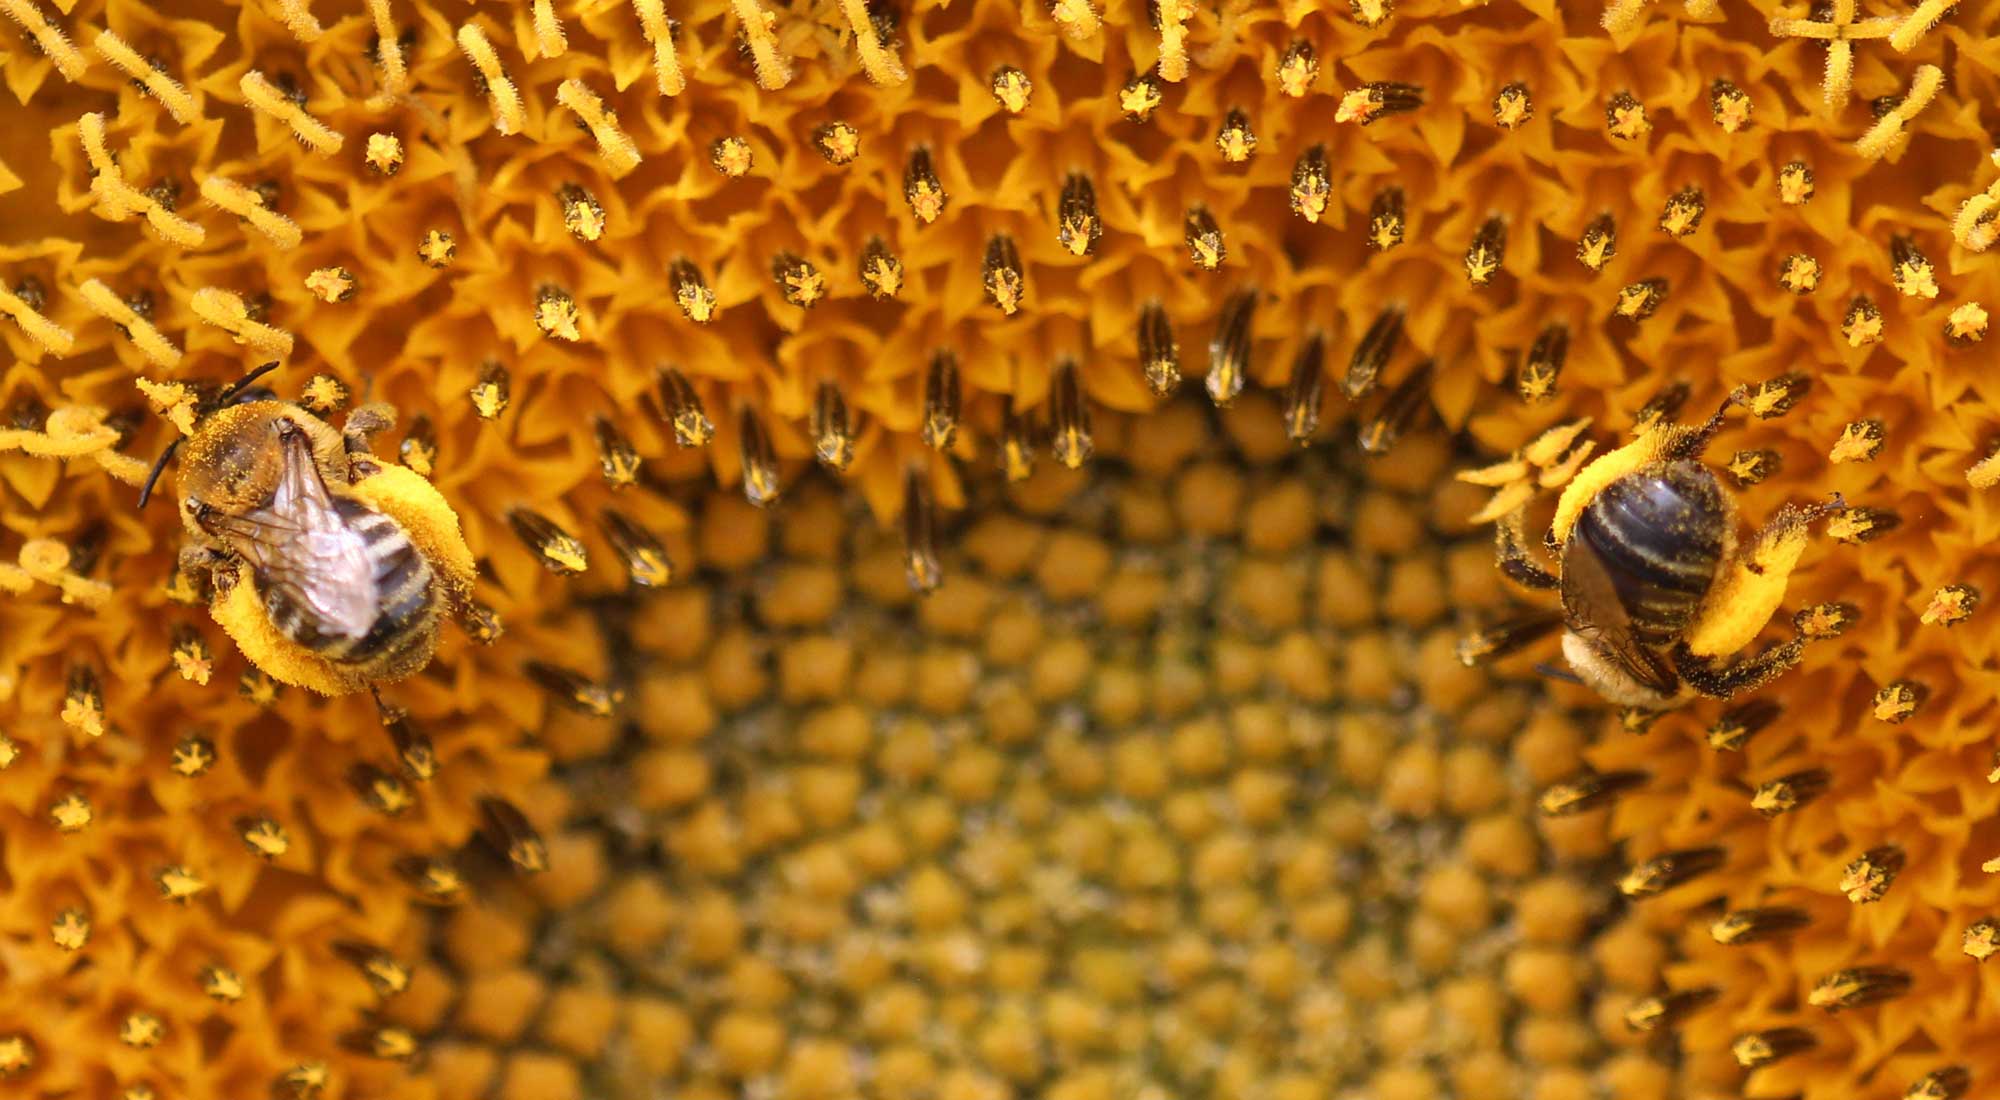 Brown bees on yellow flower.